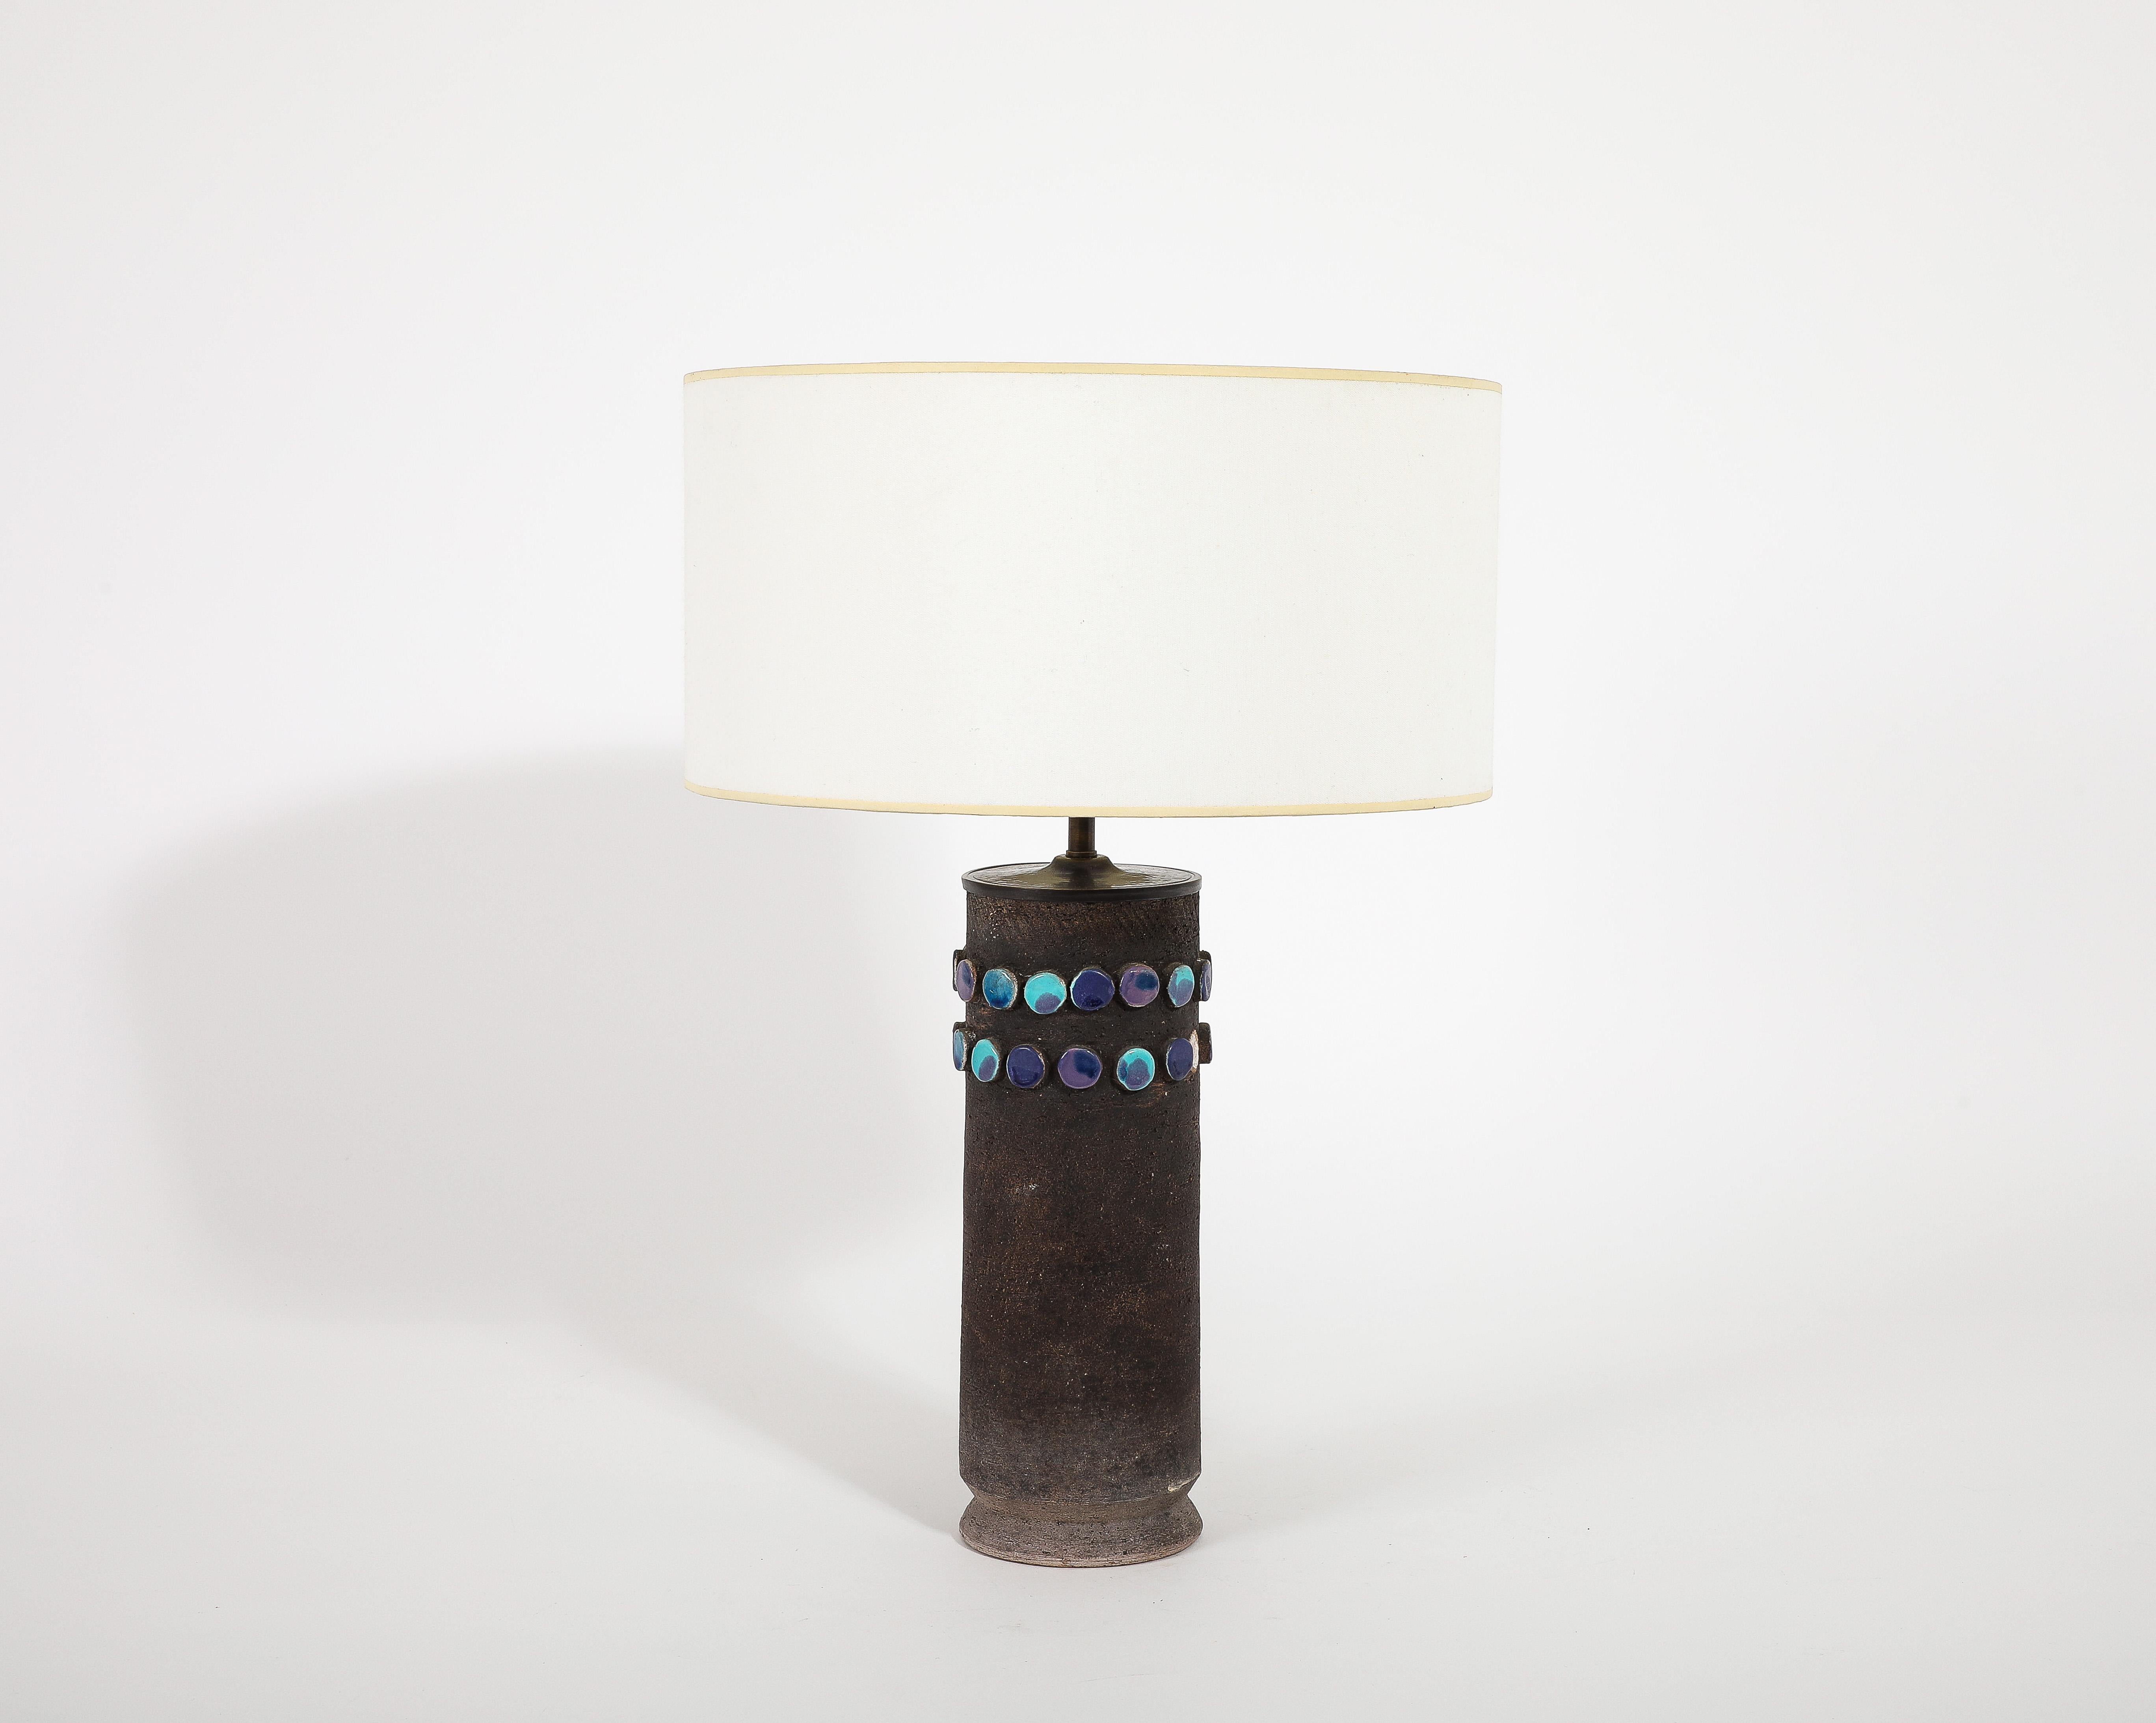 A rare Aldo Londi for Bitossi table lamp in raw earthenware augmented with ceramic dots glazed in varying shades of blue. 
